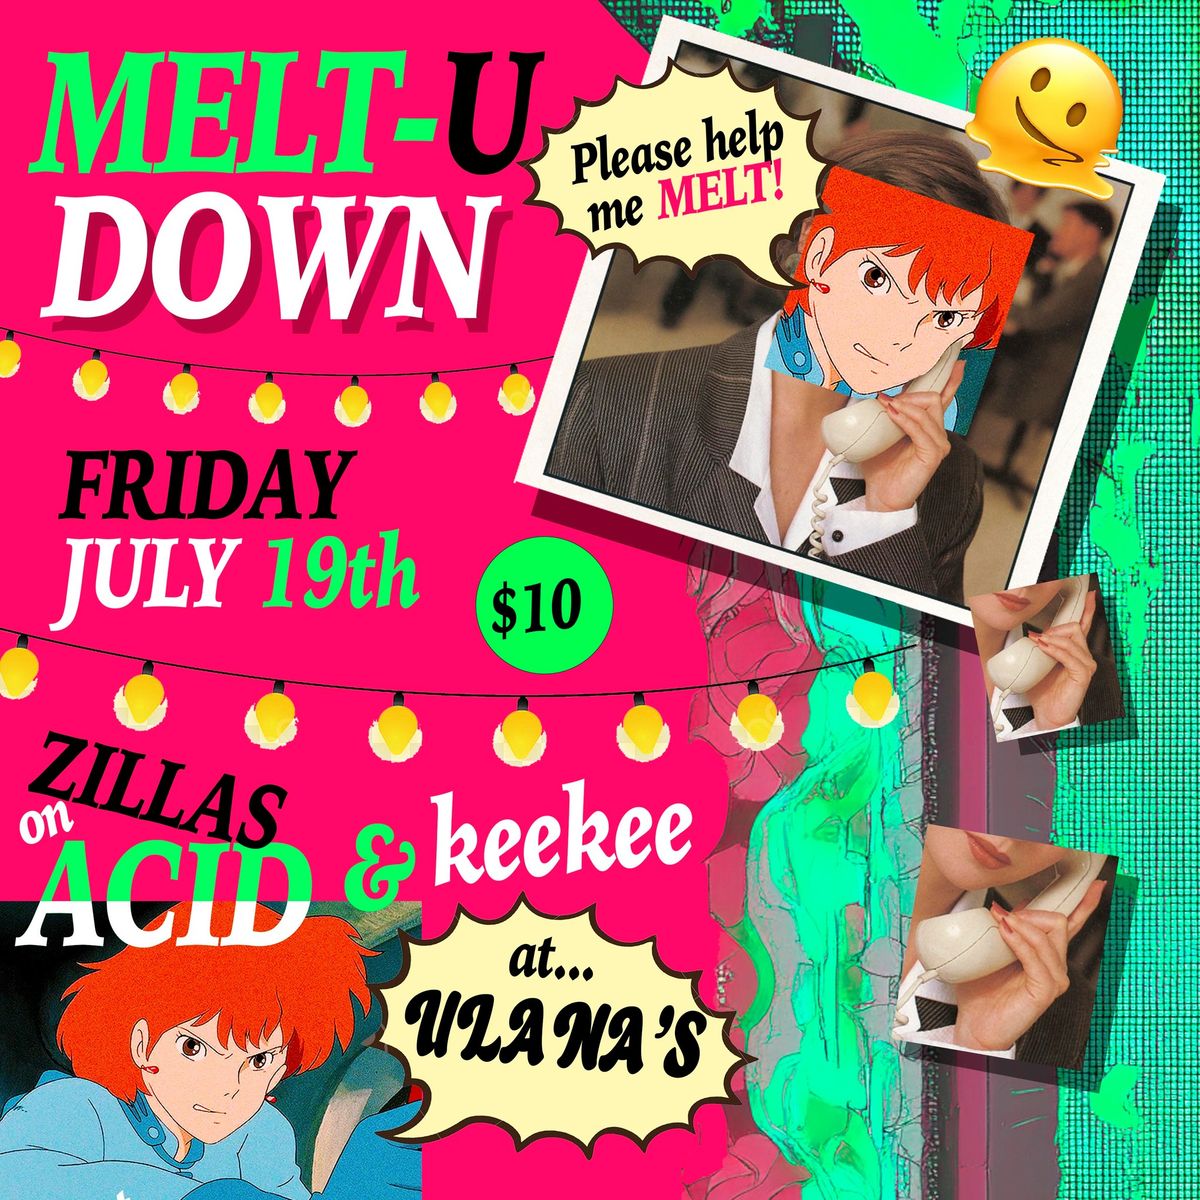 Melt You Down with Zillas on Acid & keekee